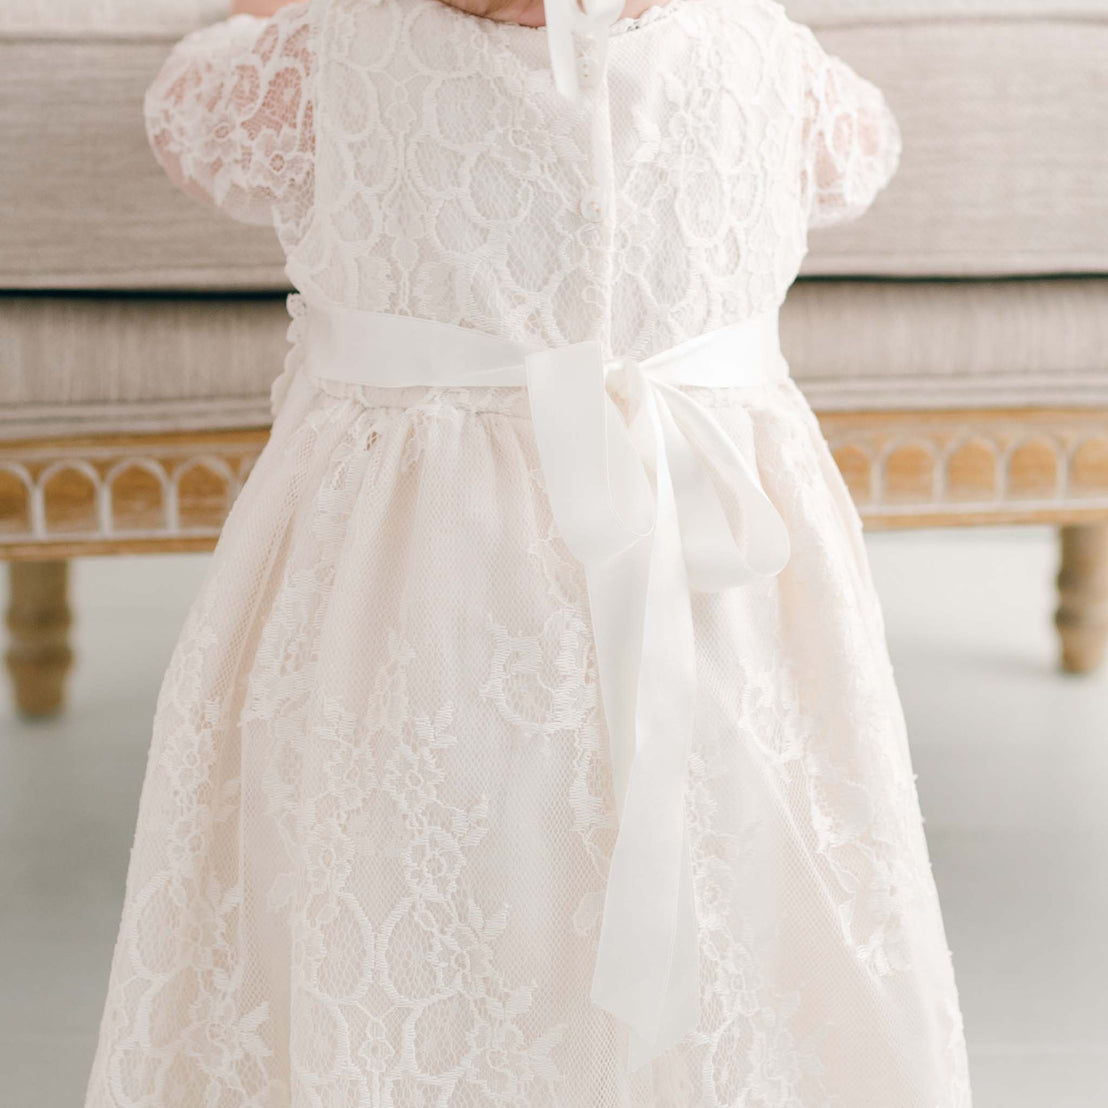 A close-up of a child wearing the Juliette Christening Gown & Bonnet, standing in front of a beige sofa. Only the torso and part of the arms are visible.